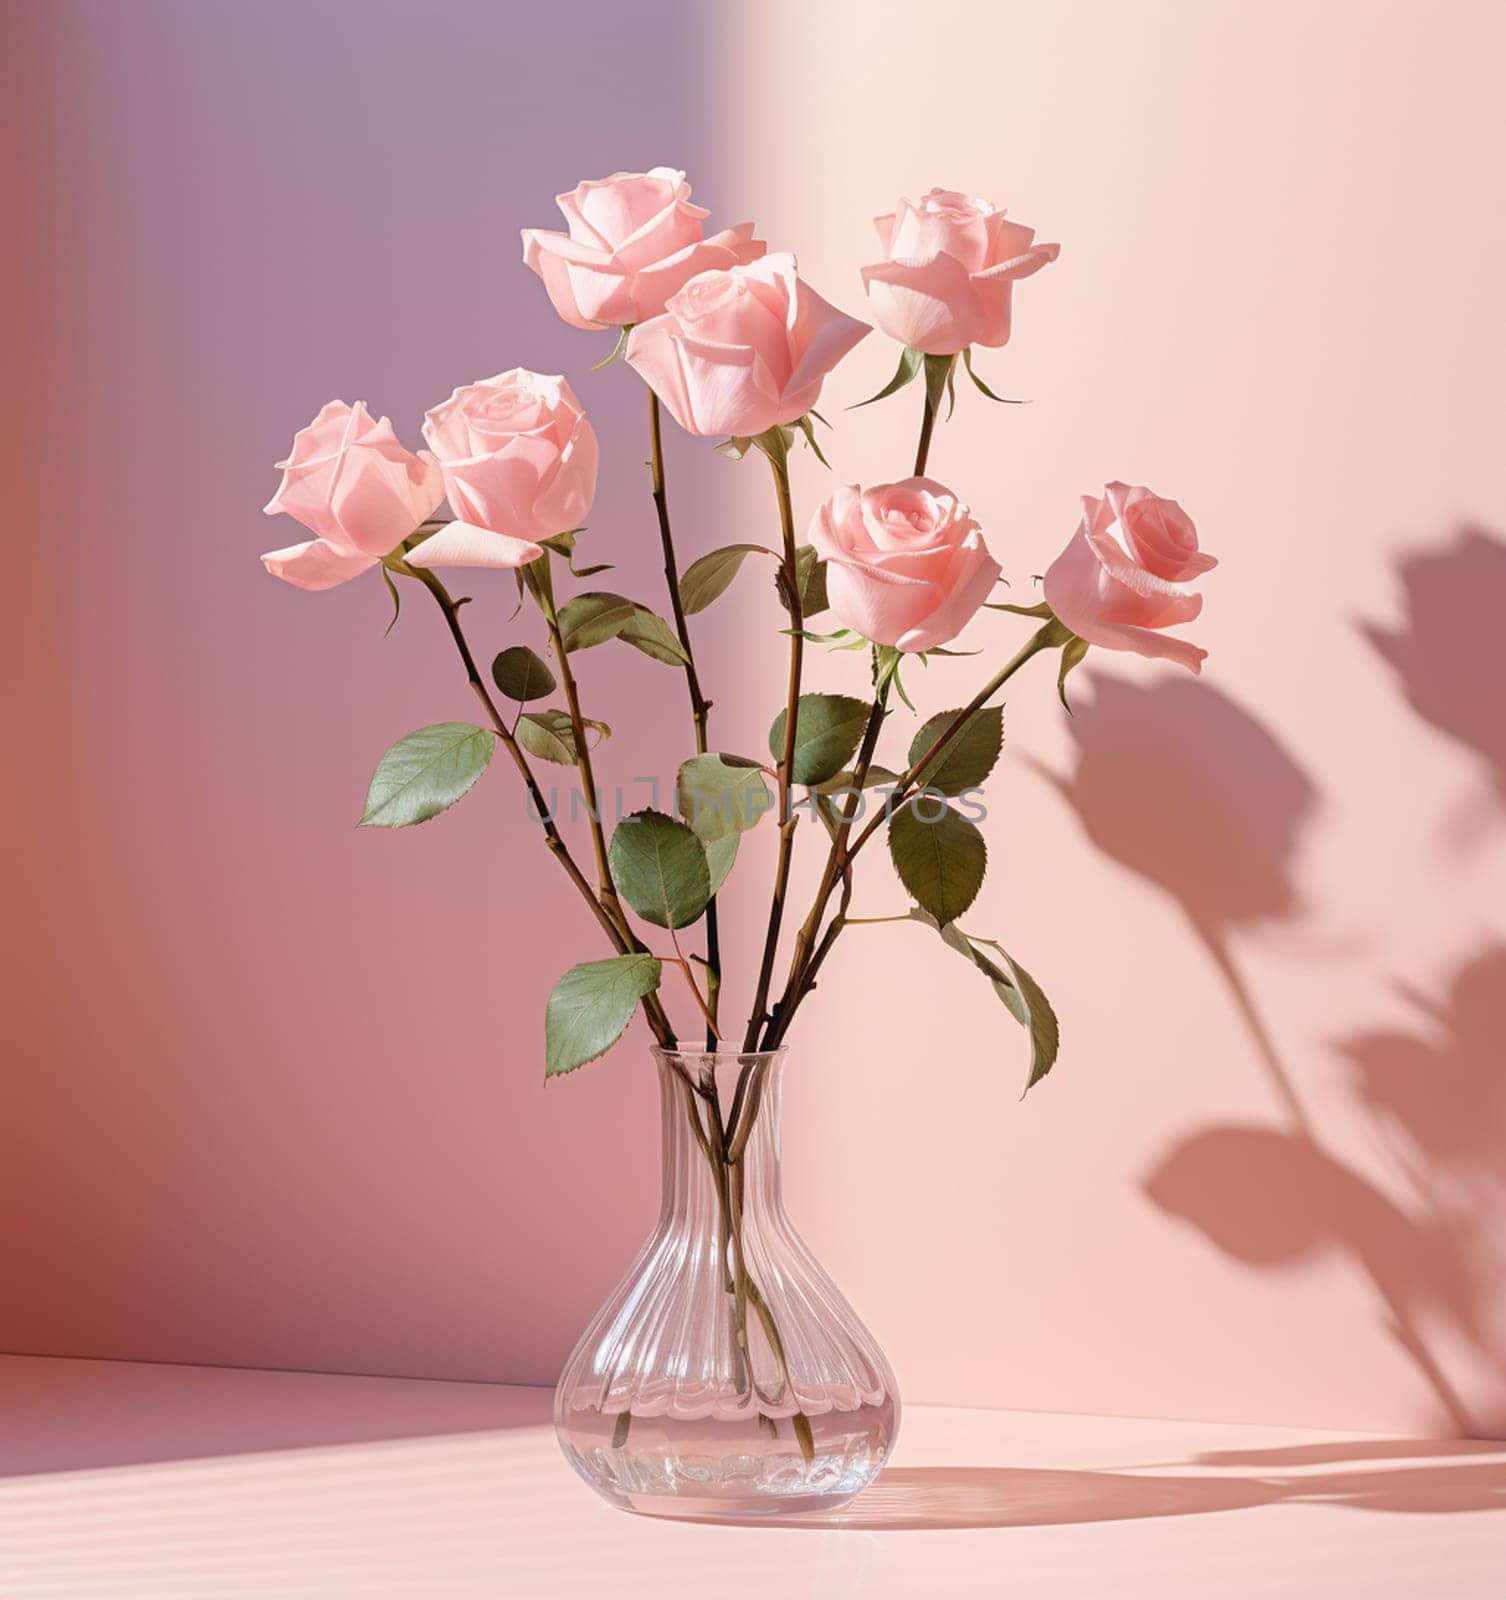 The bouquet of pink roses in a glass vase. High quality photo